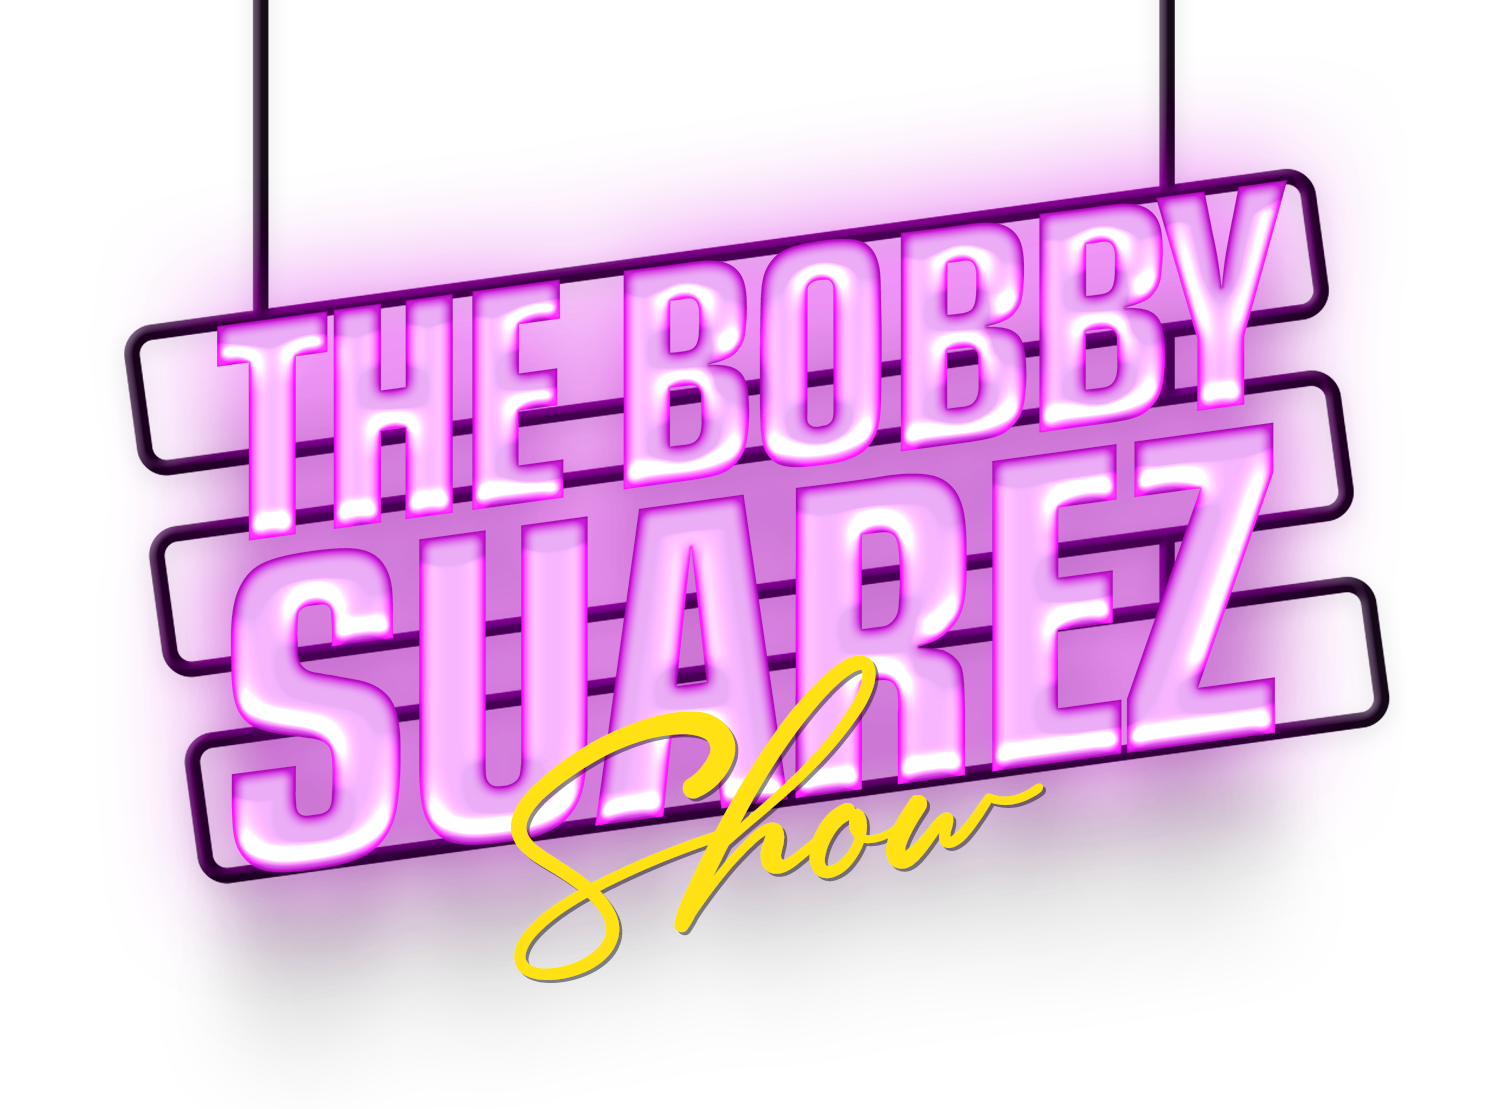 Introducing "The Bobby Suarez Show": a Captivating Podcast Spotlighting Remarkable Journeys of Business Leaders, Celebrities, and Politicians